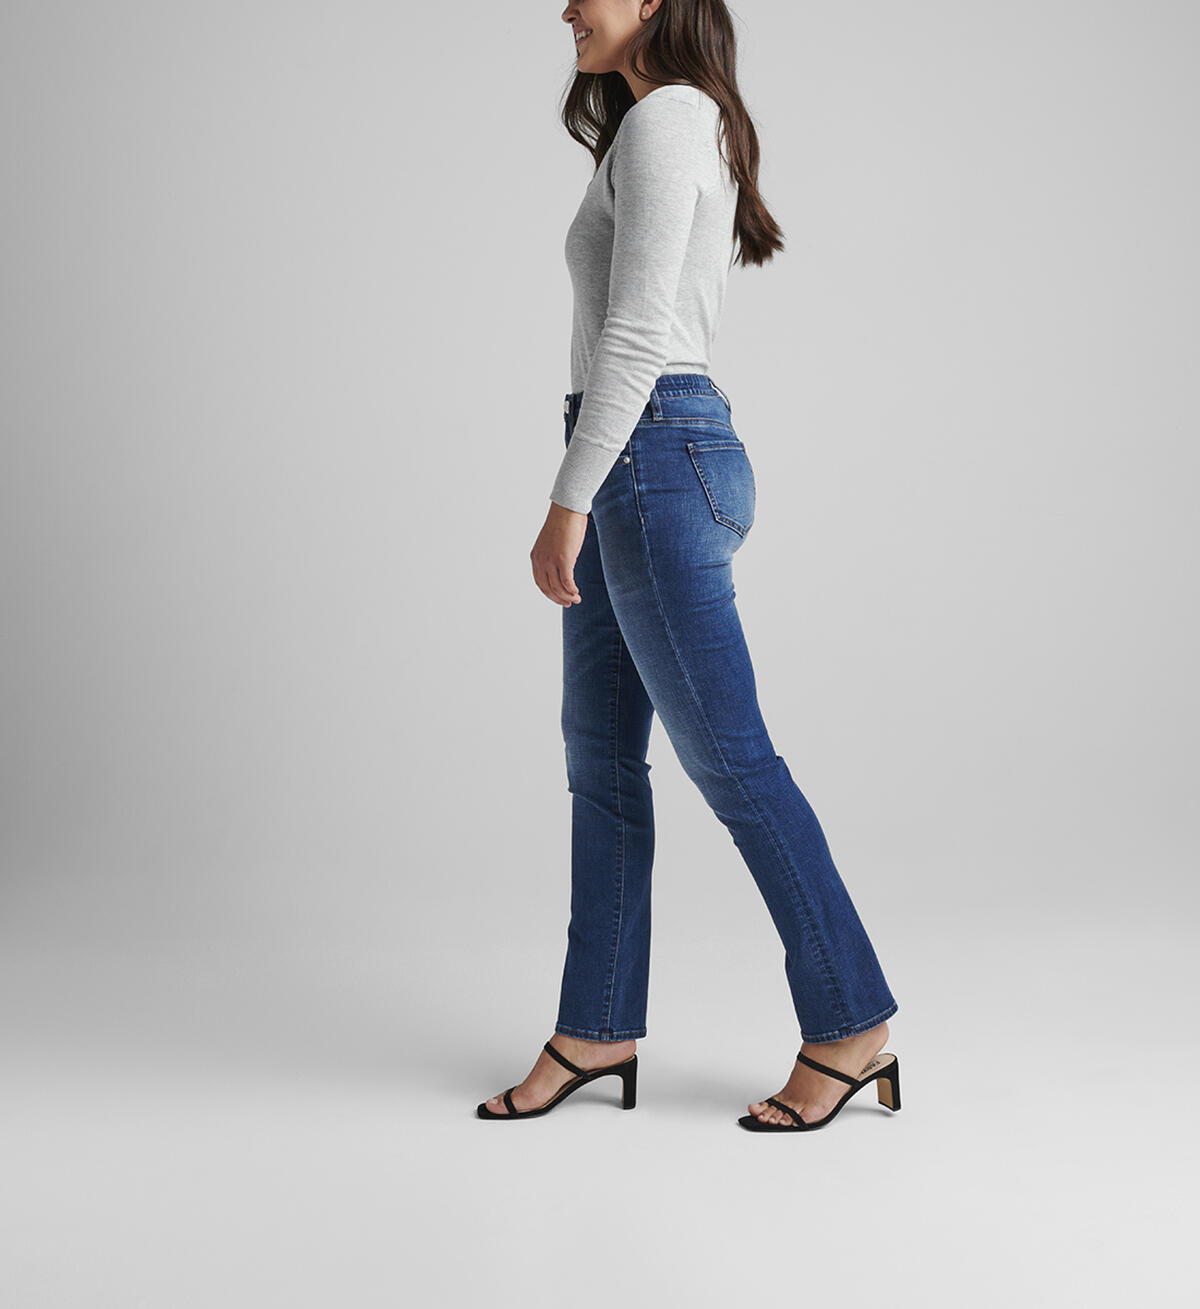 Ruby Mid Rise Straight Leg Jeans Petite, , hi-res image number 2